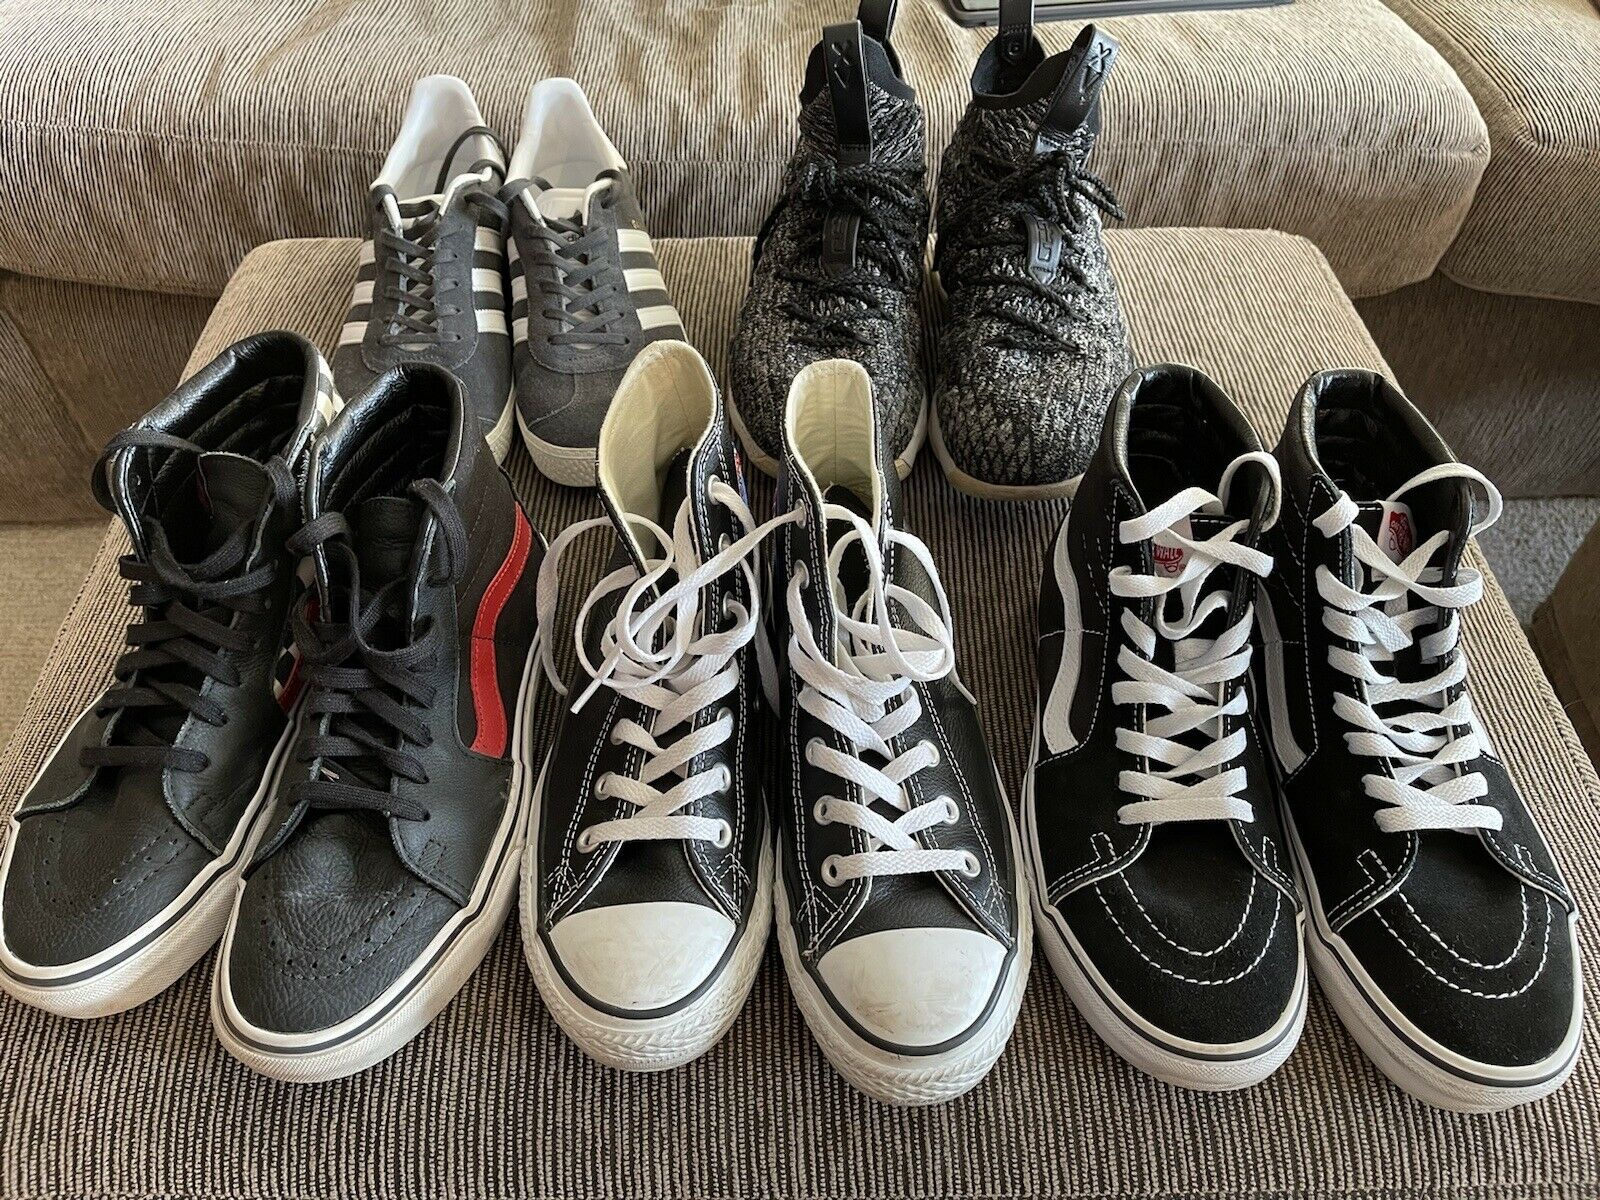 Lot of 5 Pair of Boys Shoes: Nike, Converse and Vans mostly Size 6.5 - Used